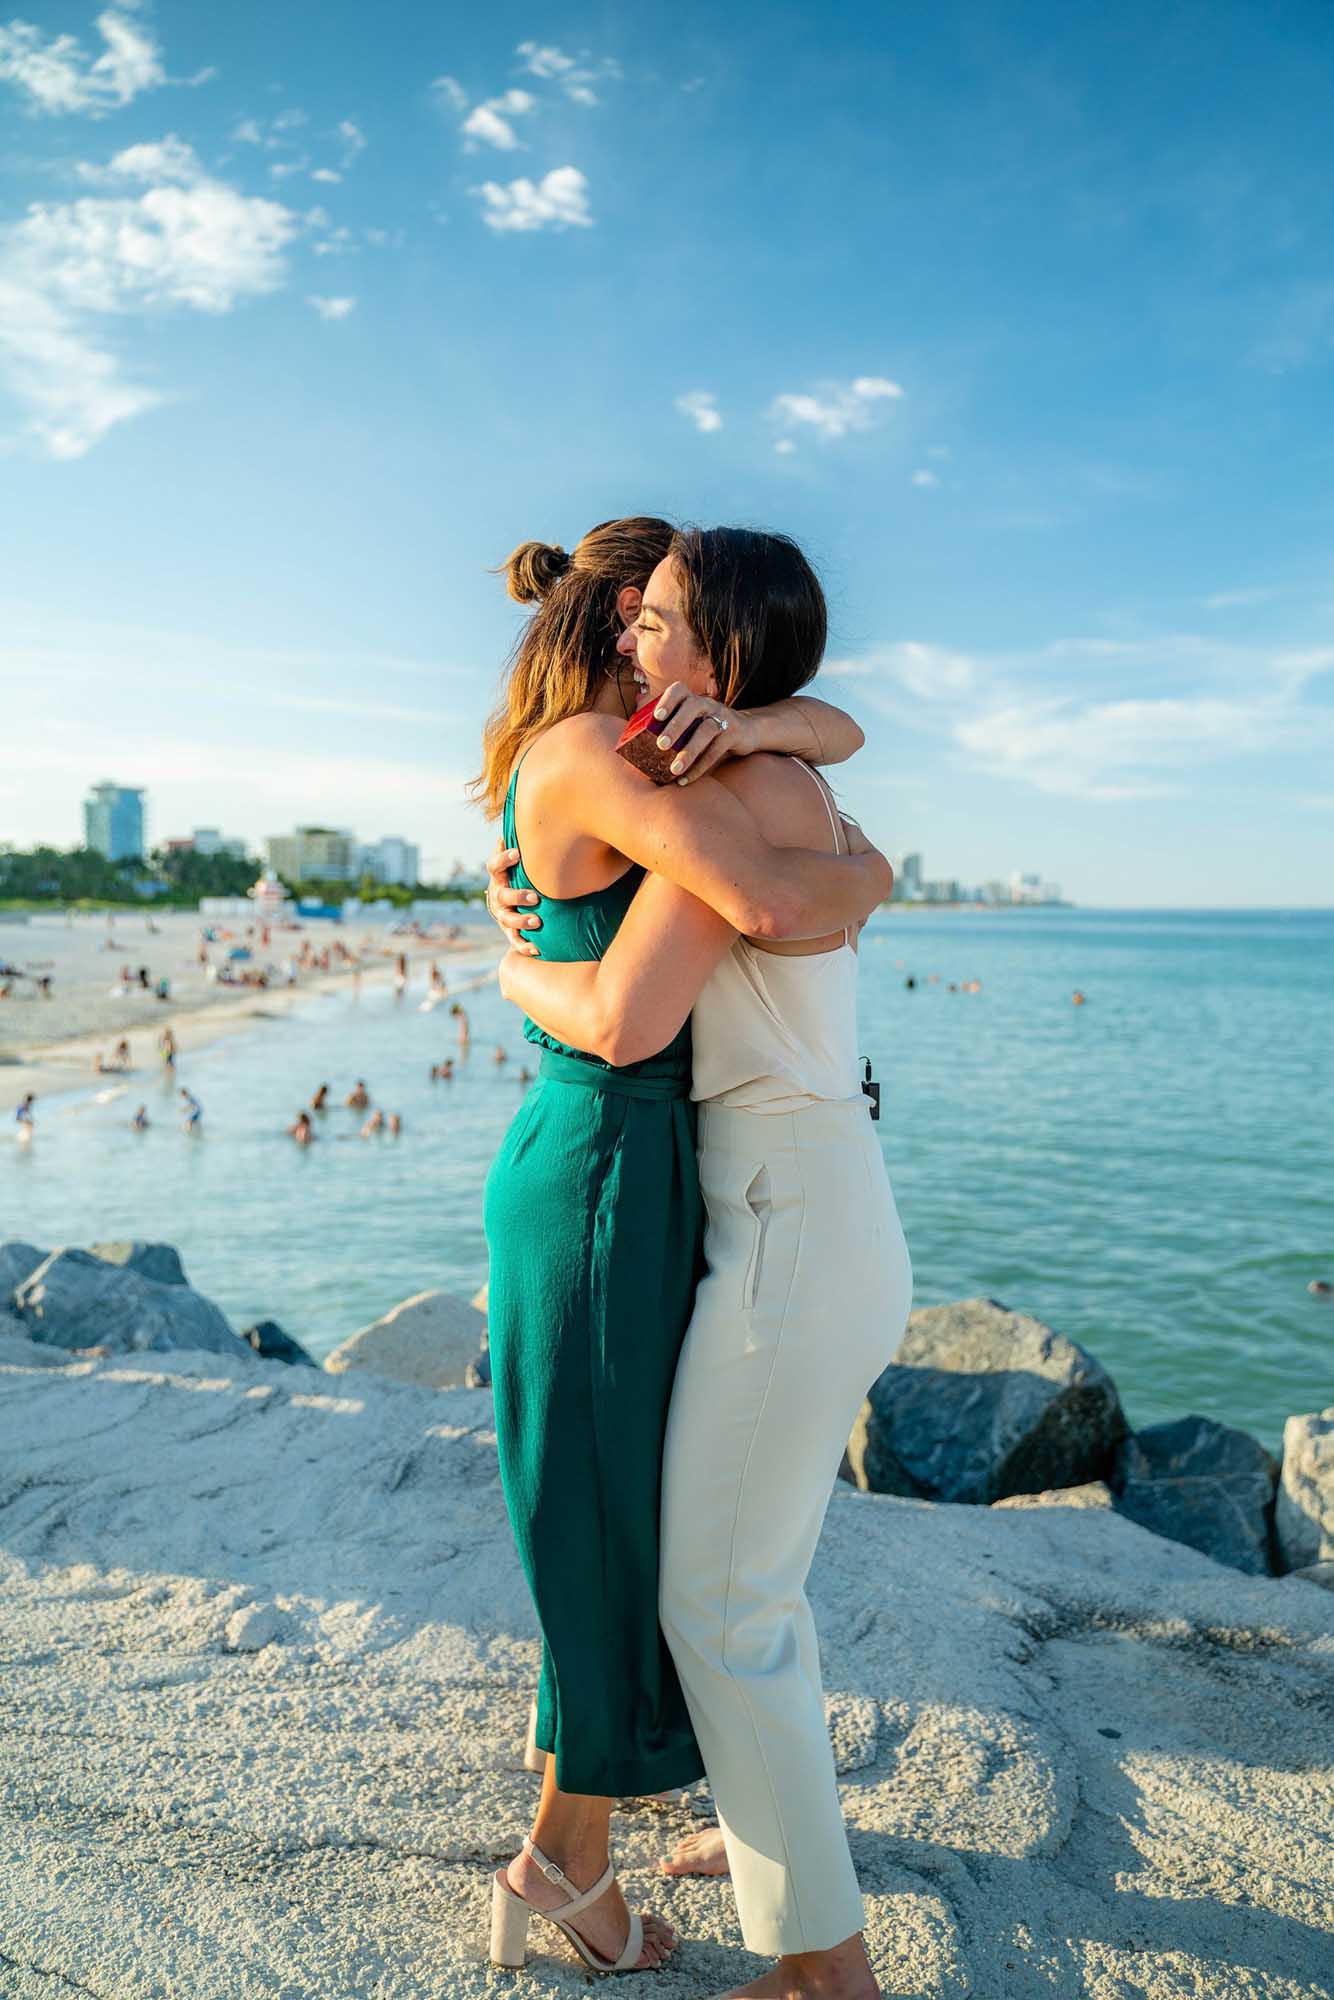 Surprise proposal in Miami, Florida. Cre8 Hope featured on Equally Wed, the leading LGBTQ+ wedding magazine and vendor directory.